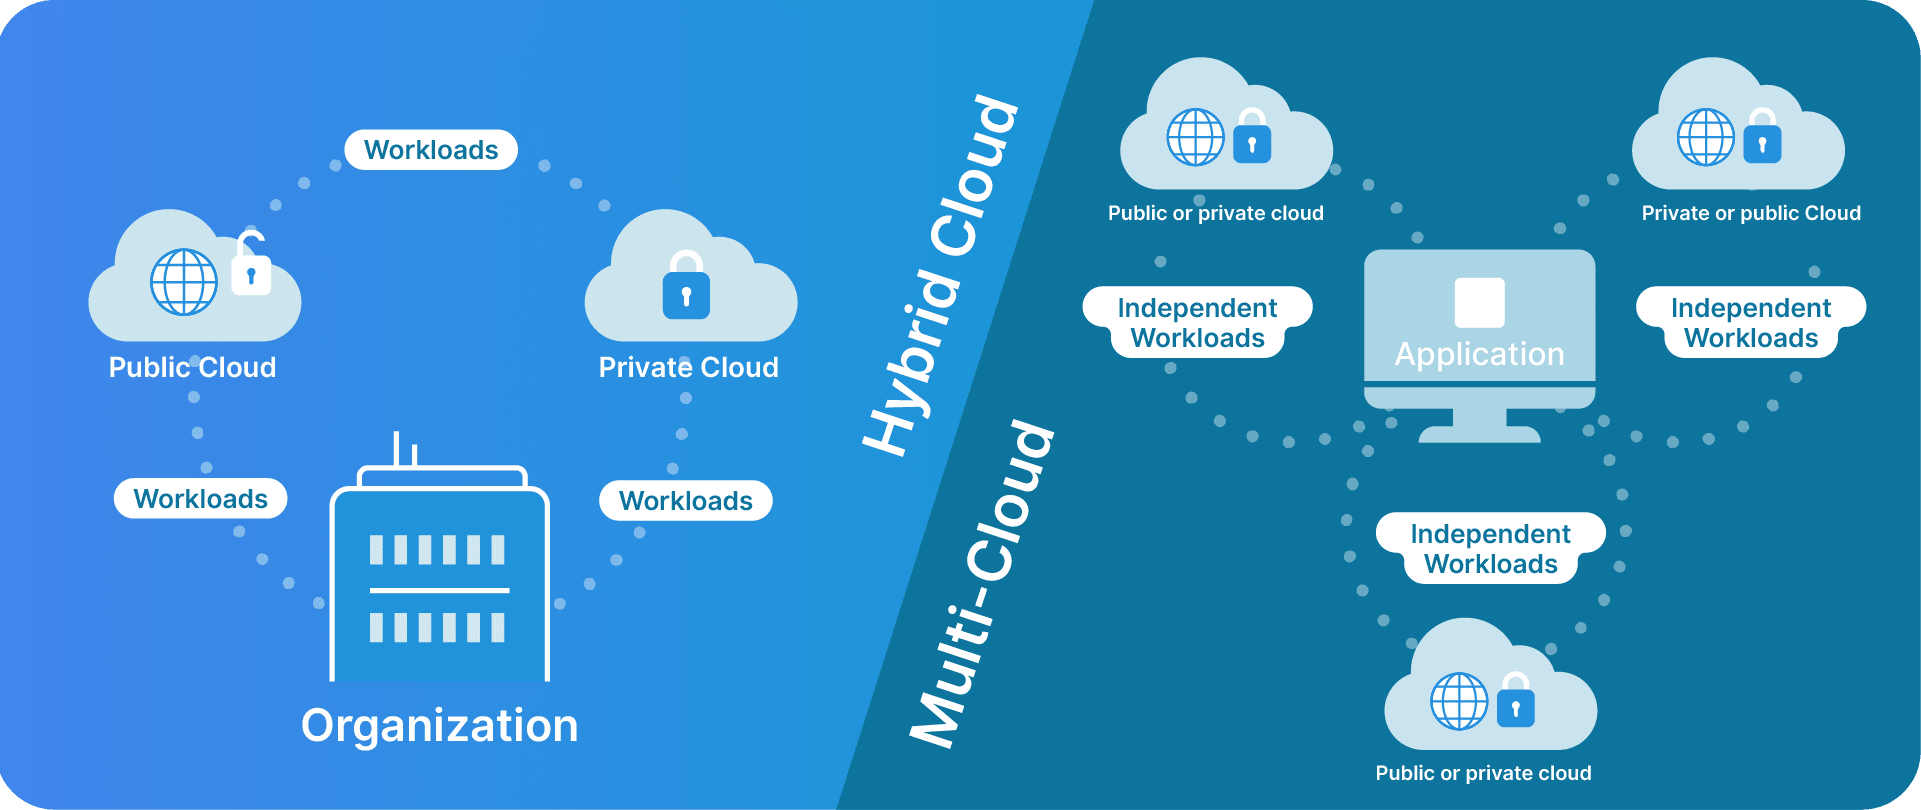 he difference between a hybrid cloud and a multi-cloud setup.